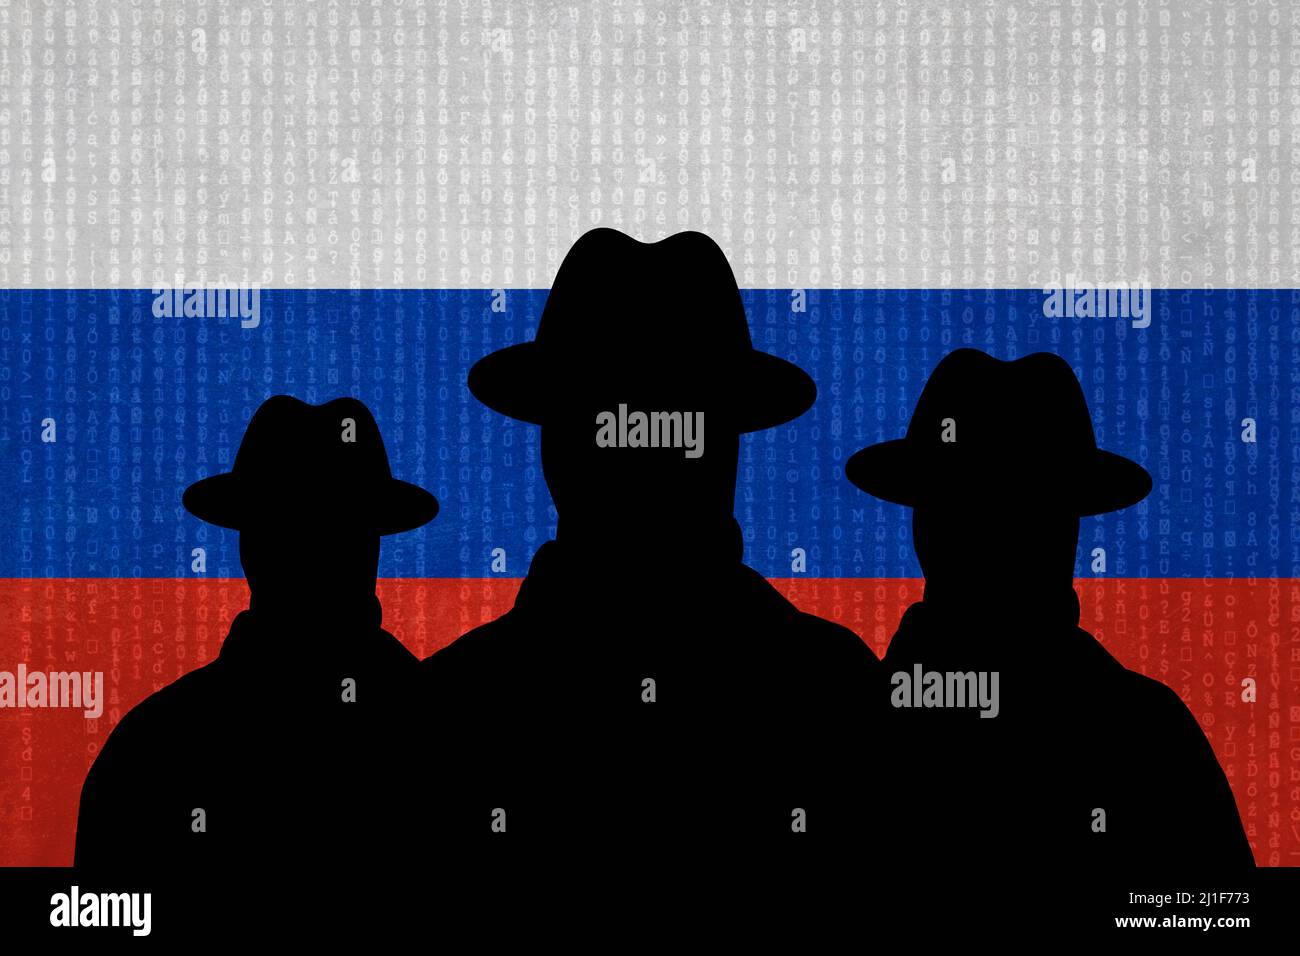 Group of Russian spies graphic illustration Stock Photo